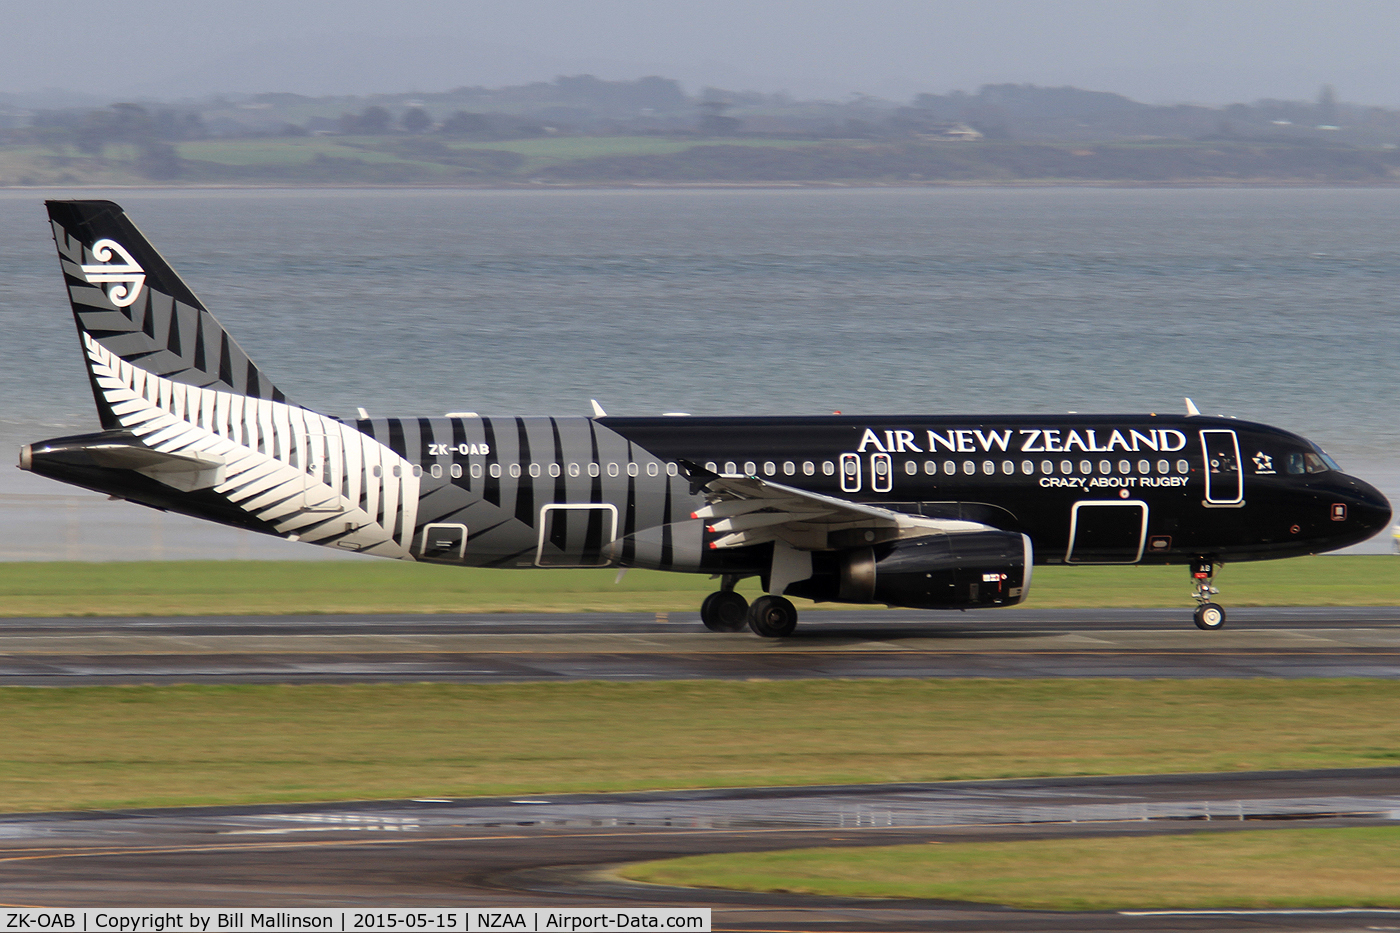 ZK-OAB, 2010 Airbus A320-232 C/N 4553, rolling on 23 for WLG